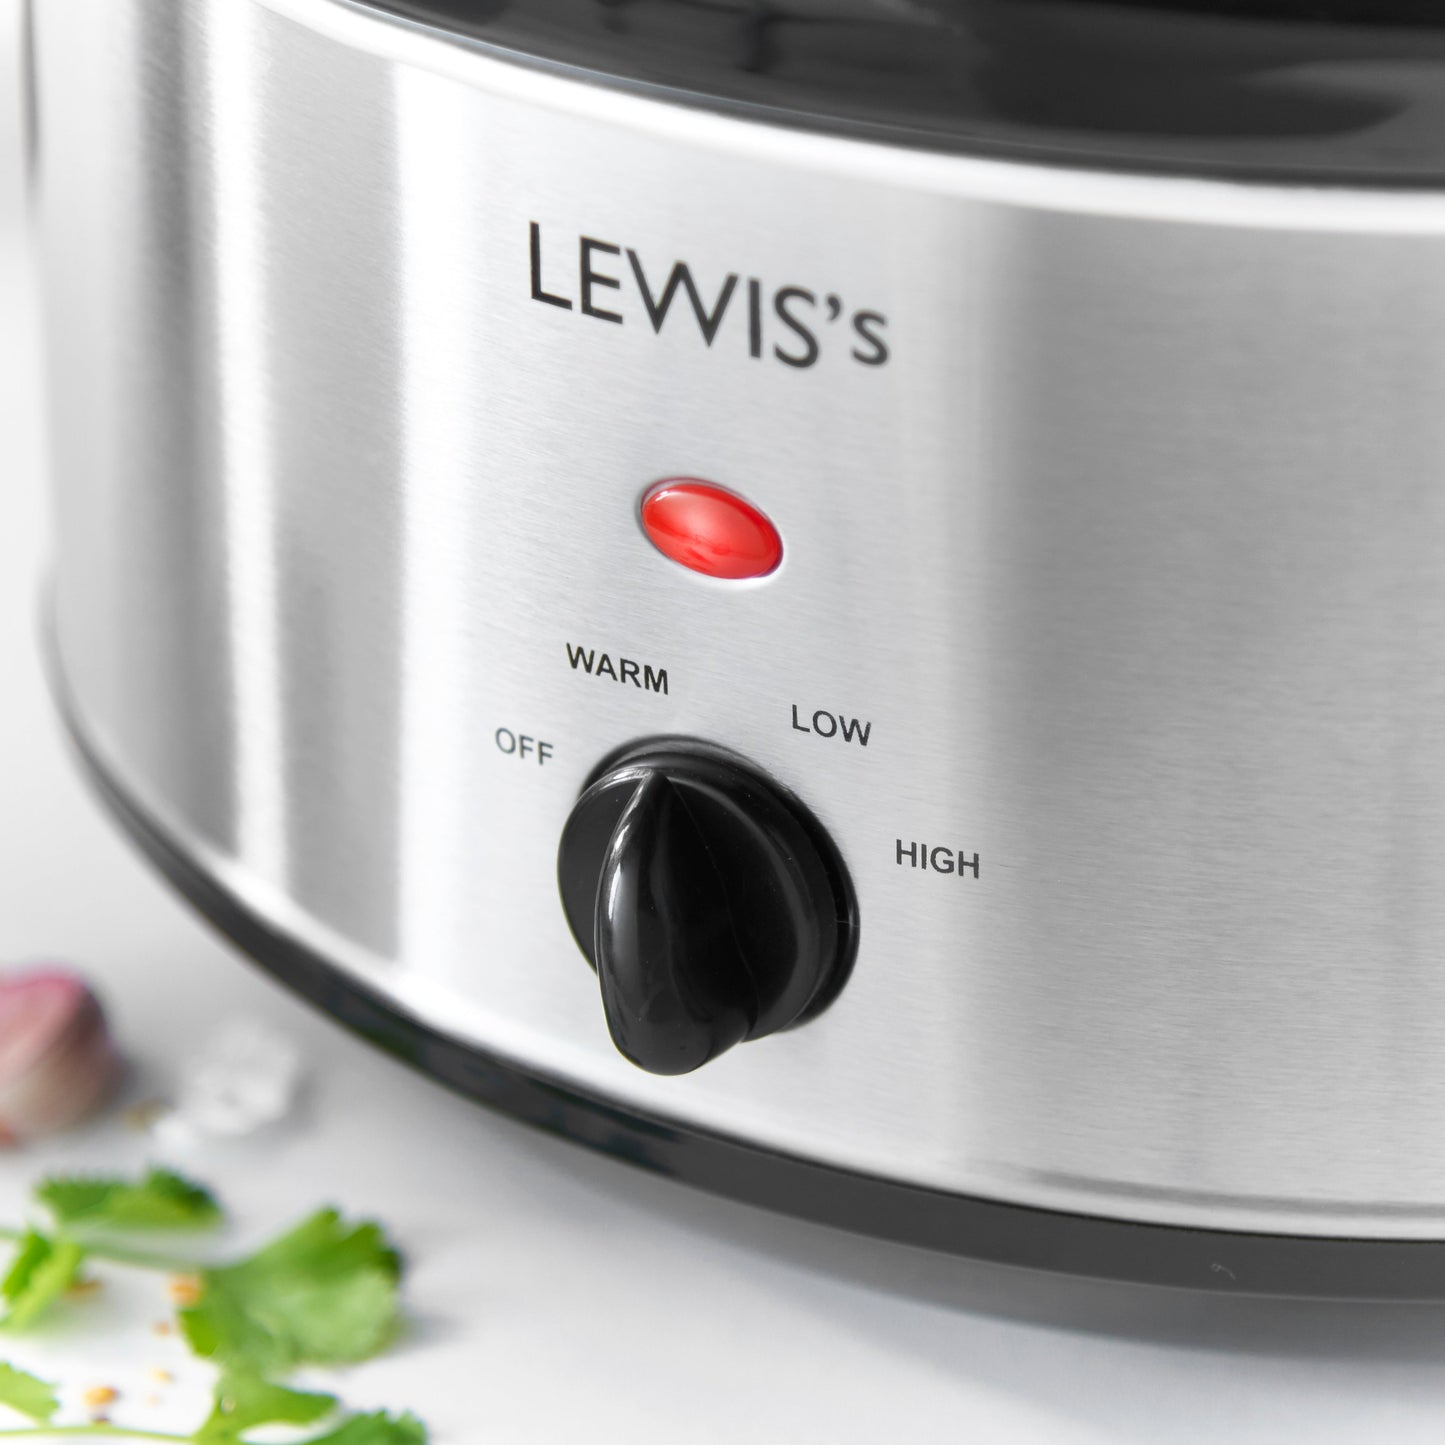 Lewis's Slow Cooker 3.5L Stainless Steel